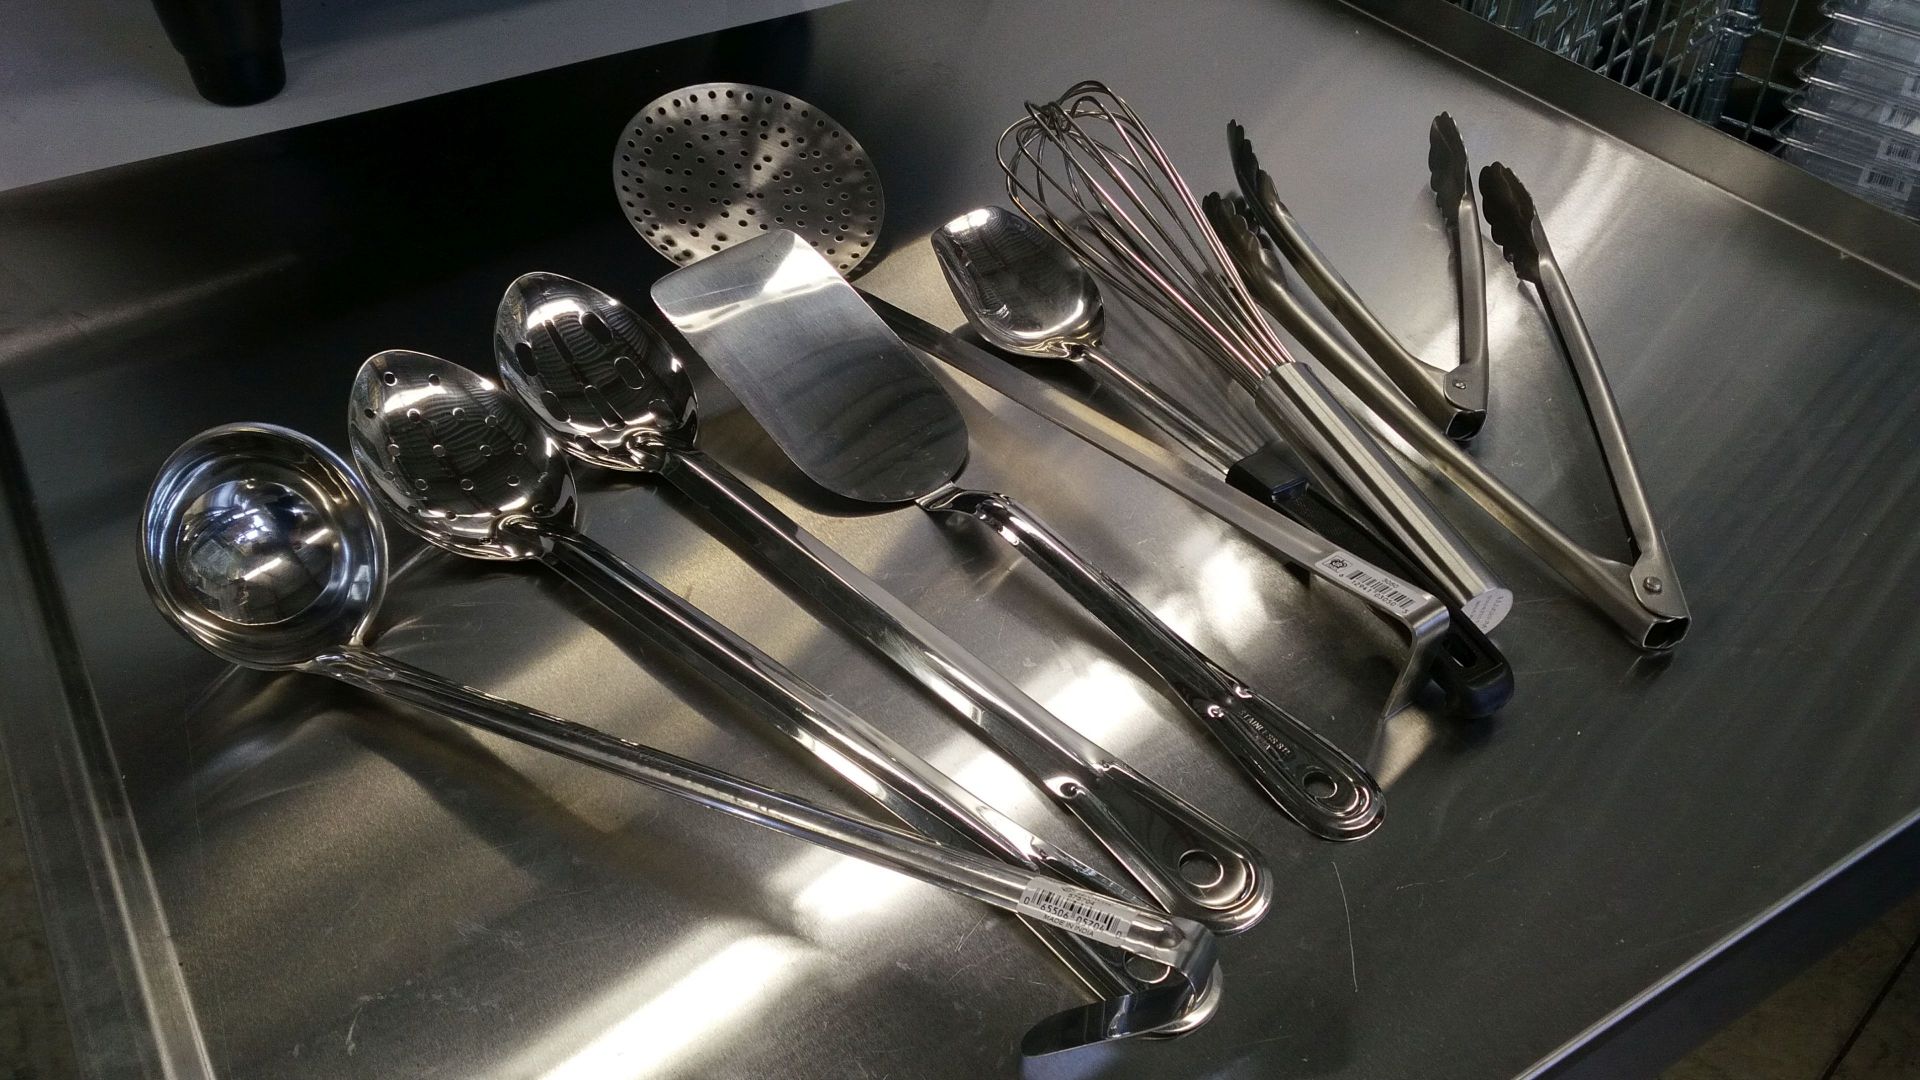 Stainless Kitchen Tools Set - Lot of 9 Pieces